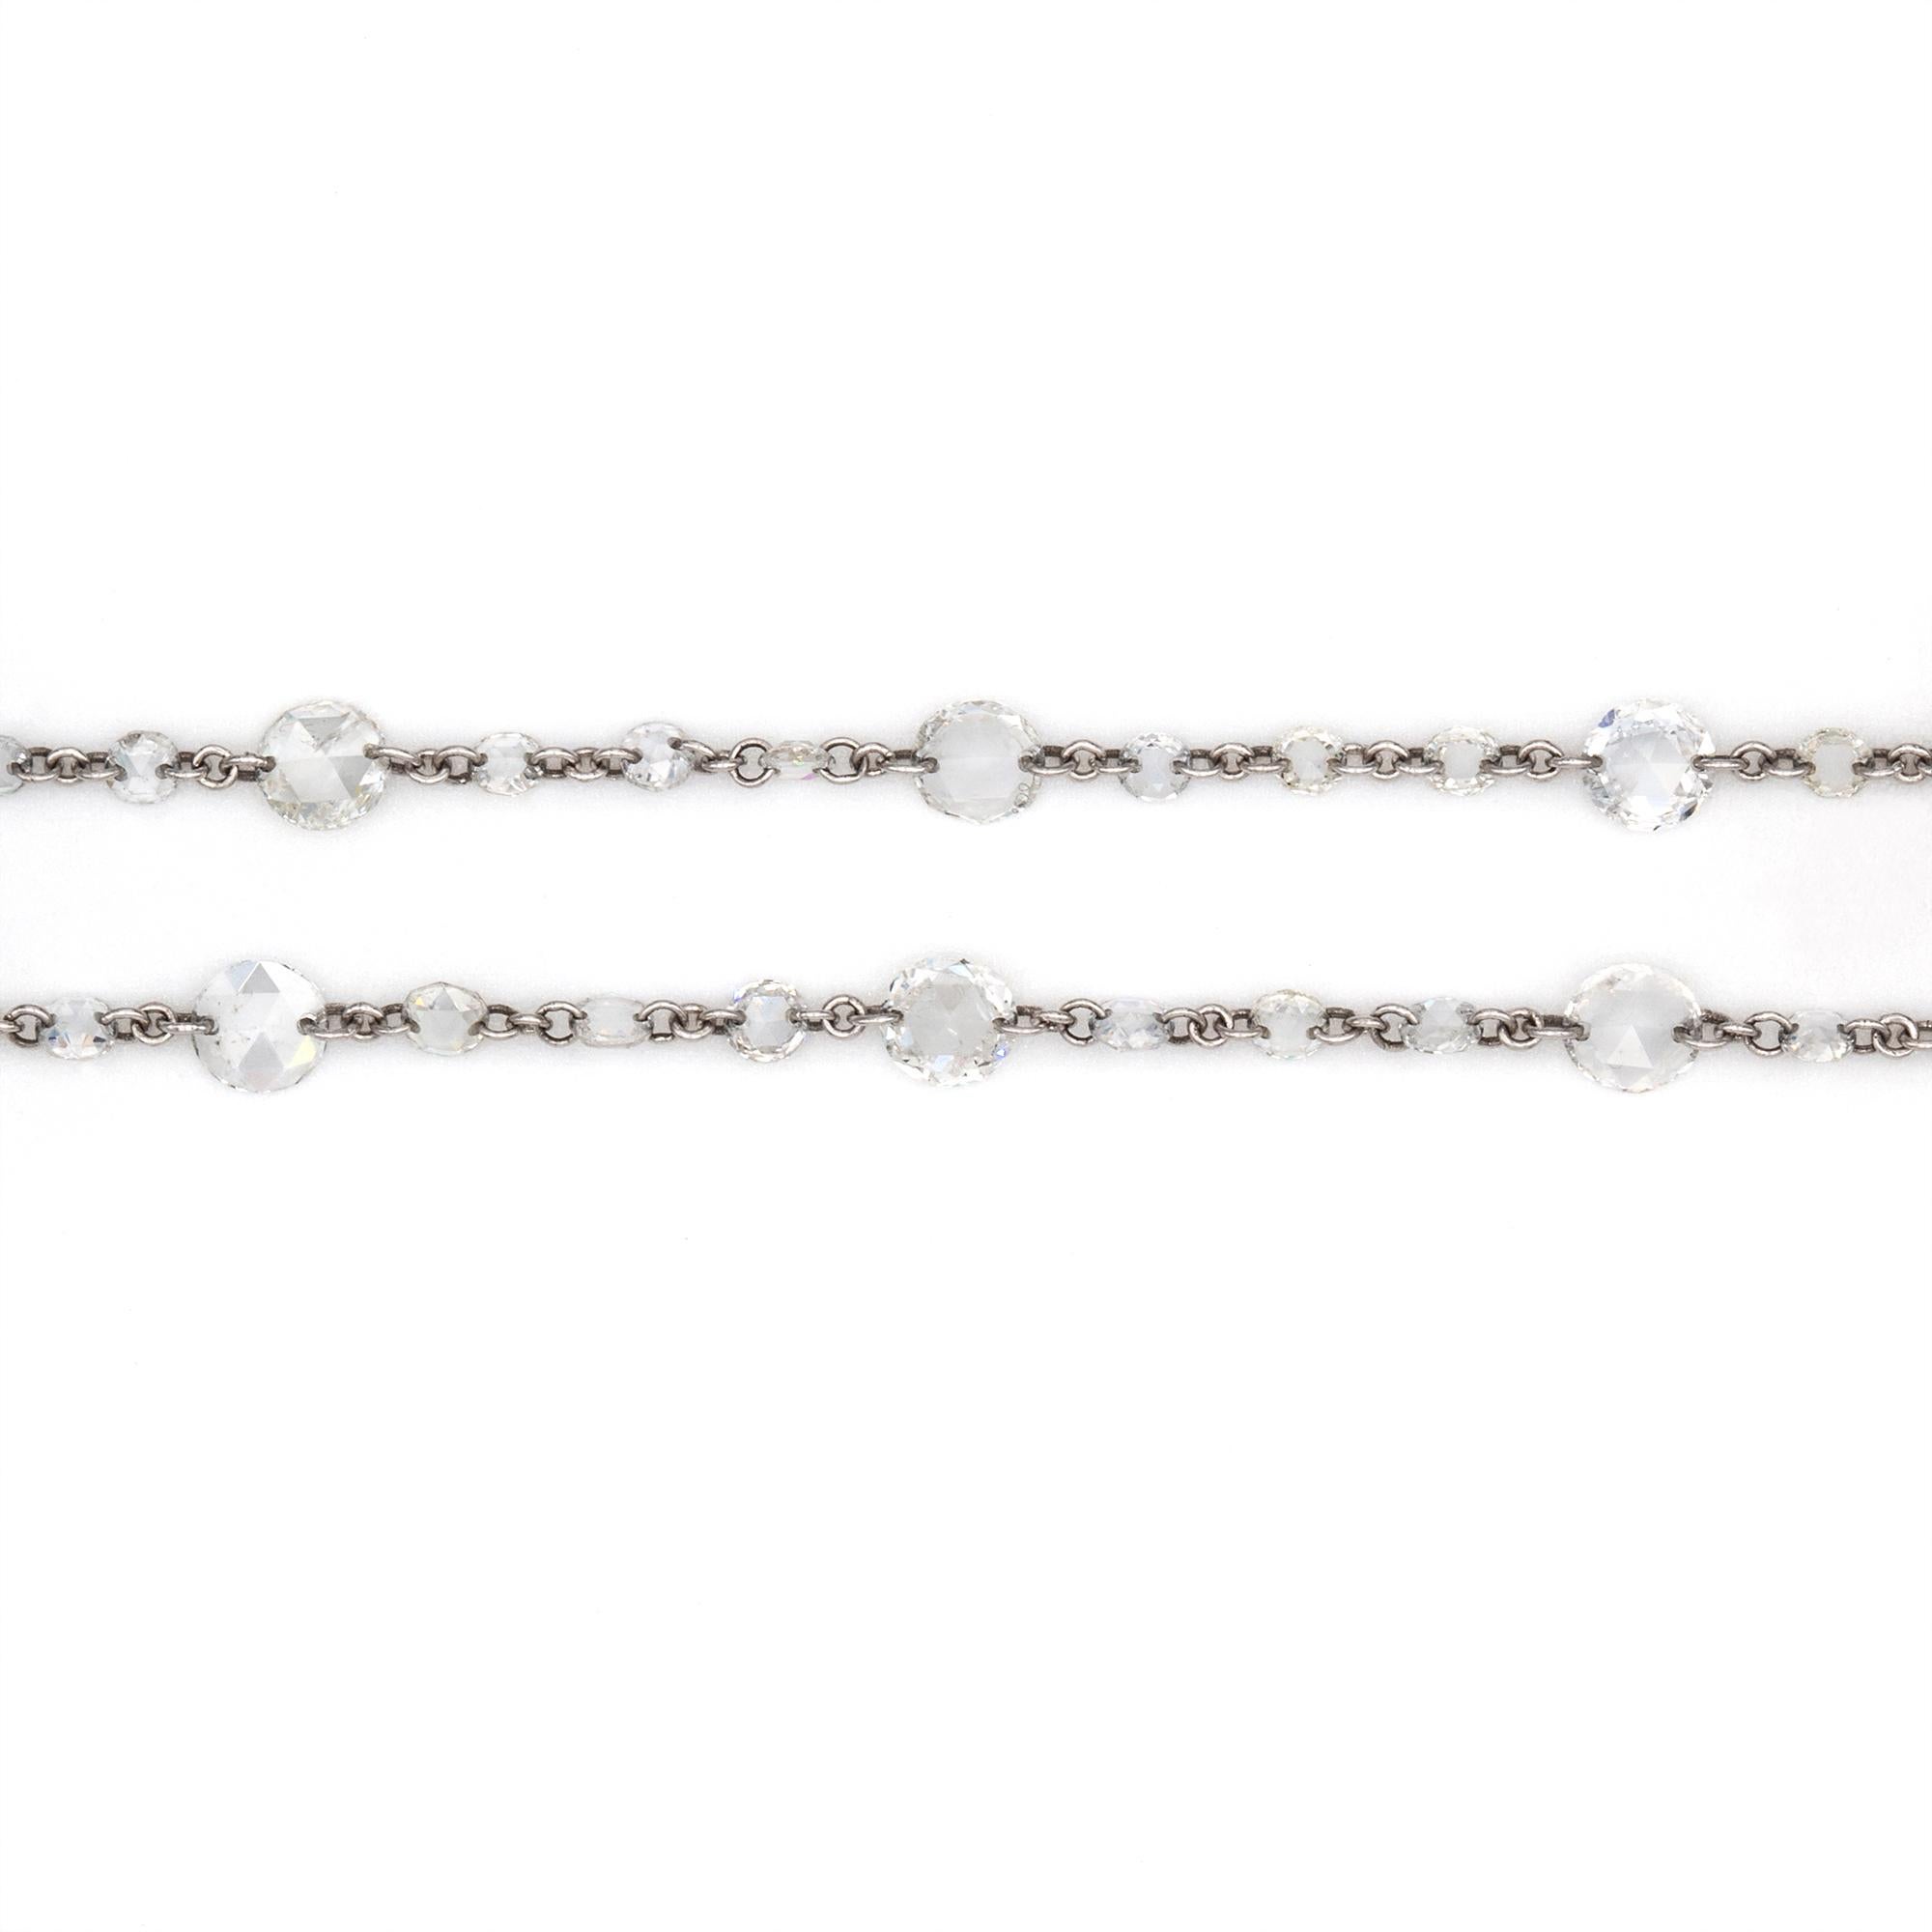 AA rose-cut diamond-set chain, the one hundred and ninety five rose-cut diamonds weighing 11.06 carats in total, connected with platinum links, to a platinum lobster clasp, hallmarked platinum, London 2019, bearing Bentley and Skinner sponsor